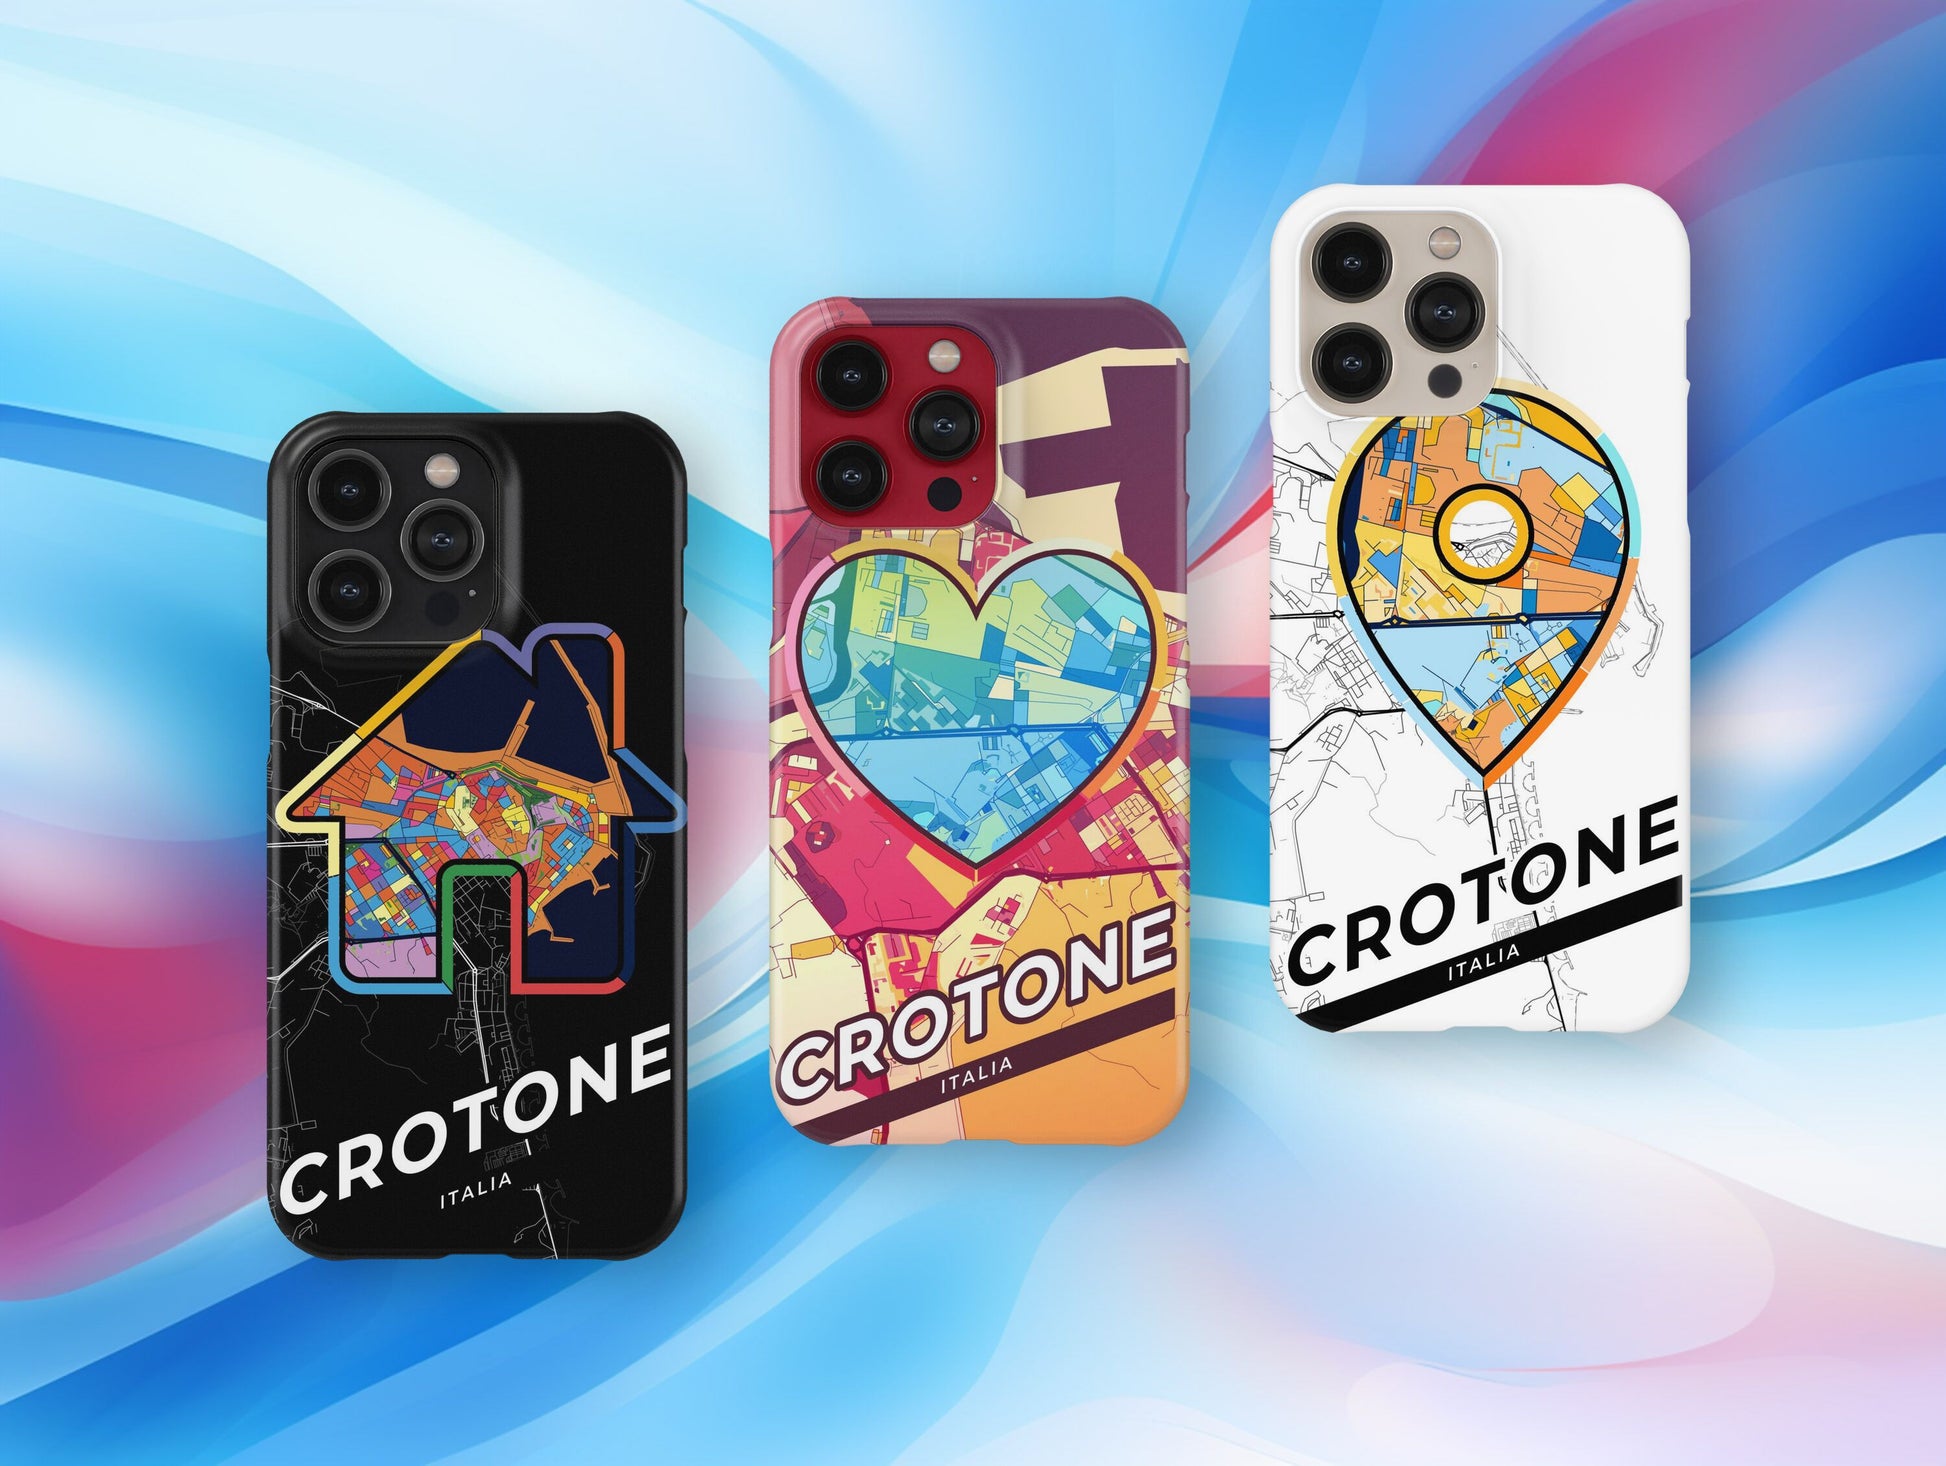 Crotone Italy slim phone case with colorful icon. Birthday, wedding or housewarming gift. Couple match cases.